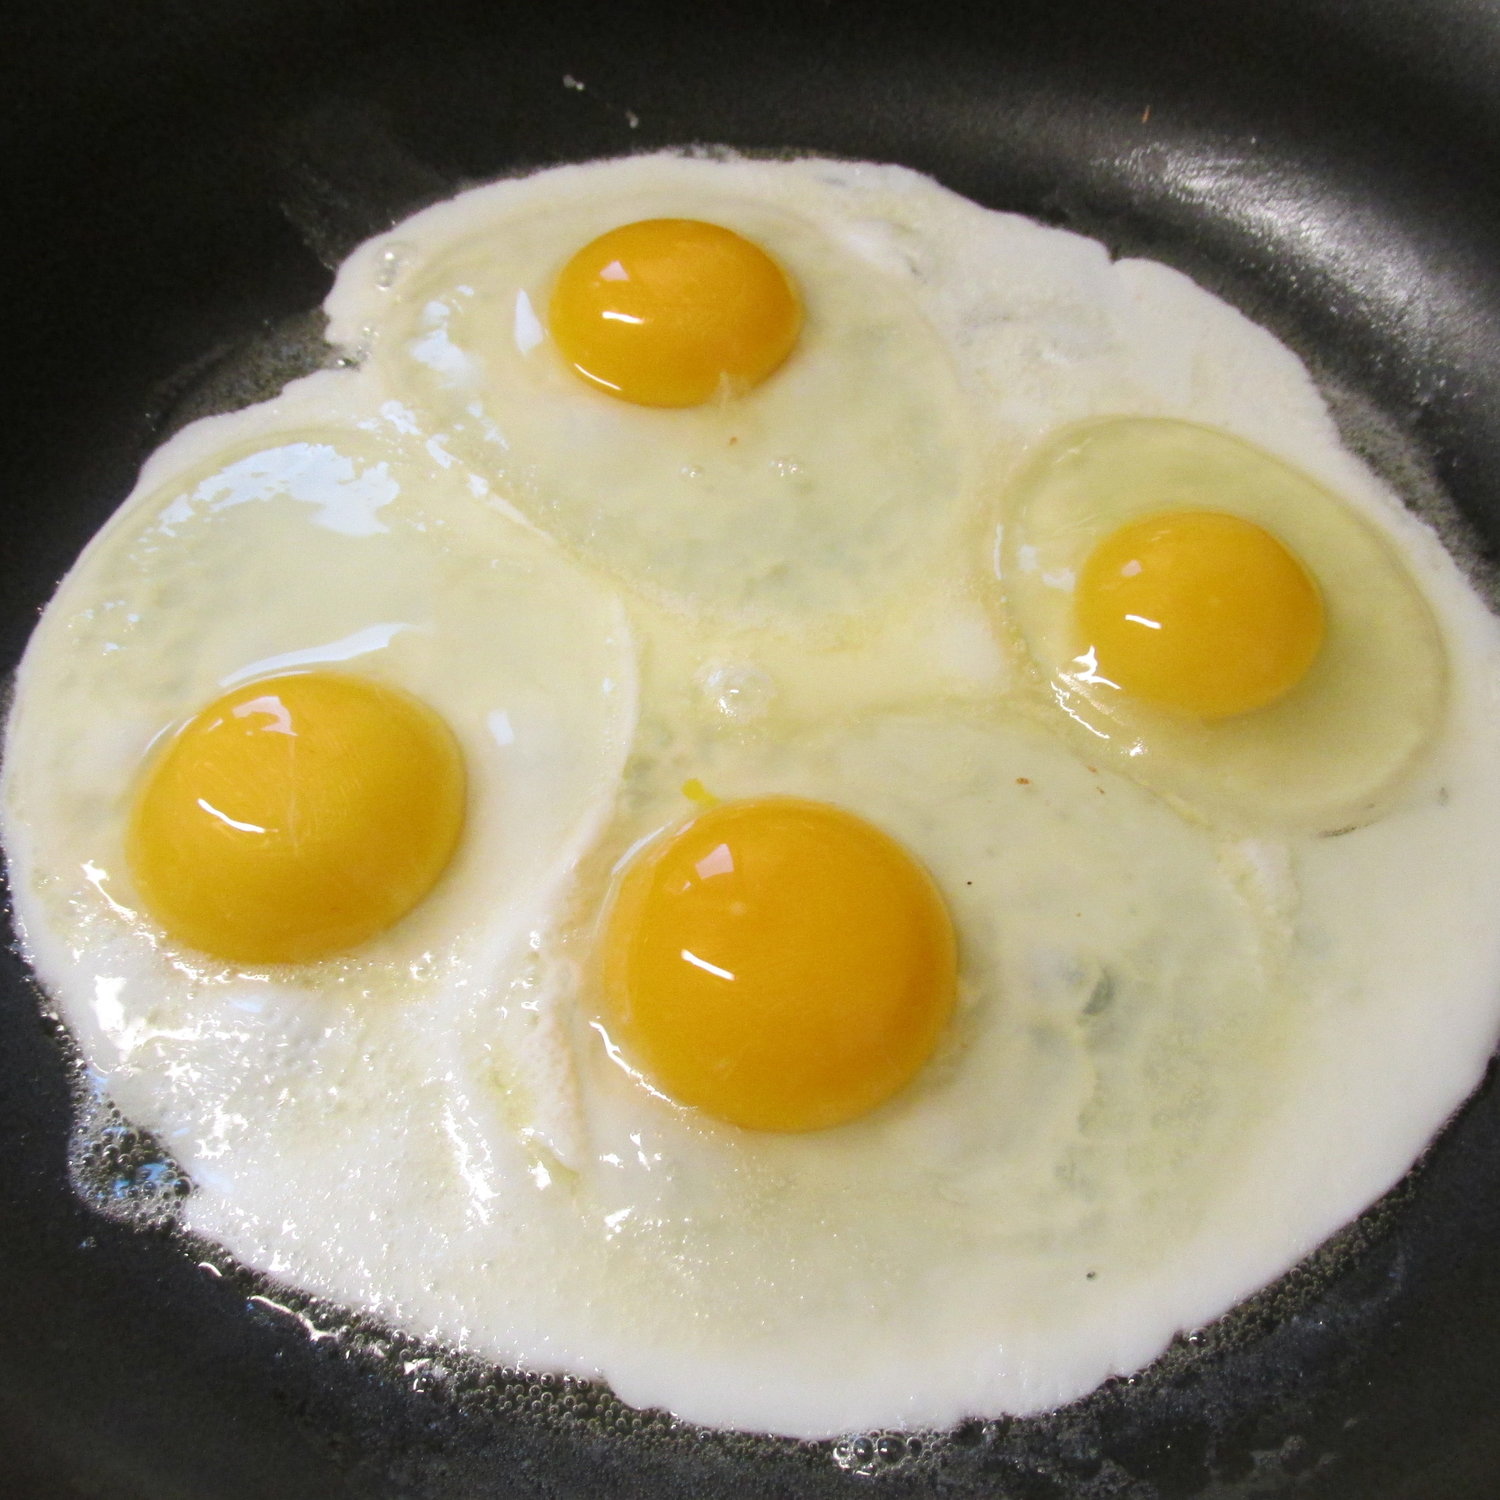 Four eggs for two people is known as a "42."